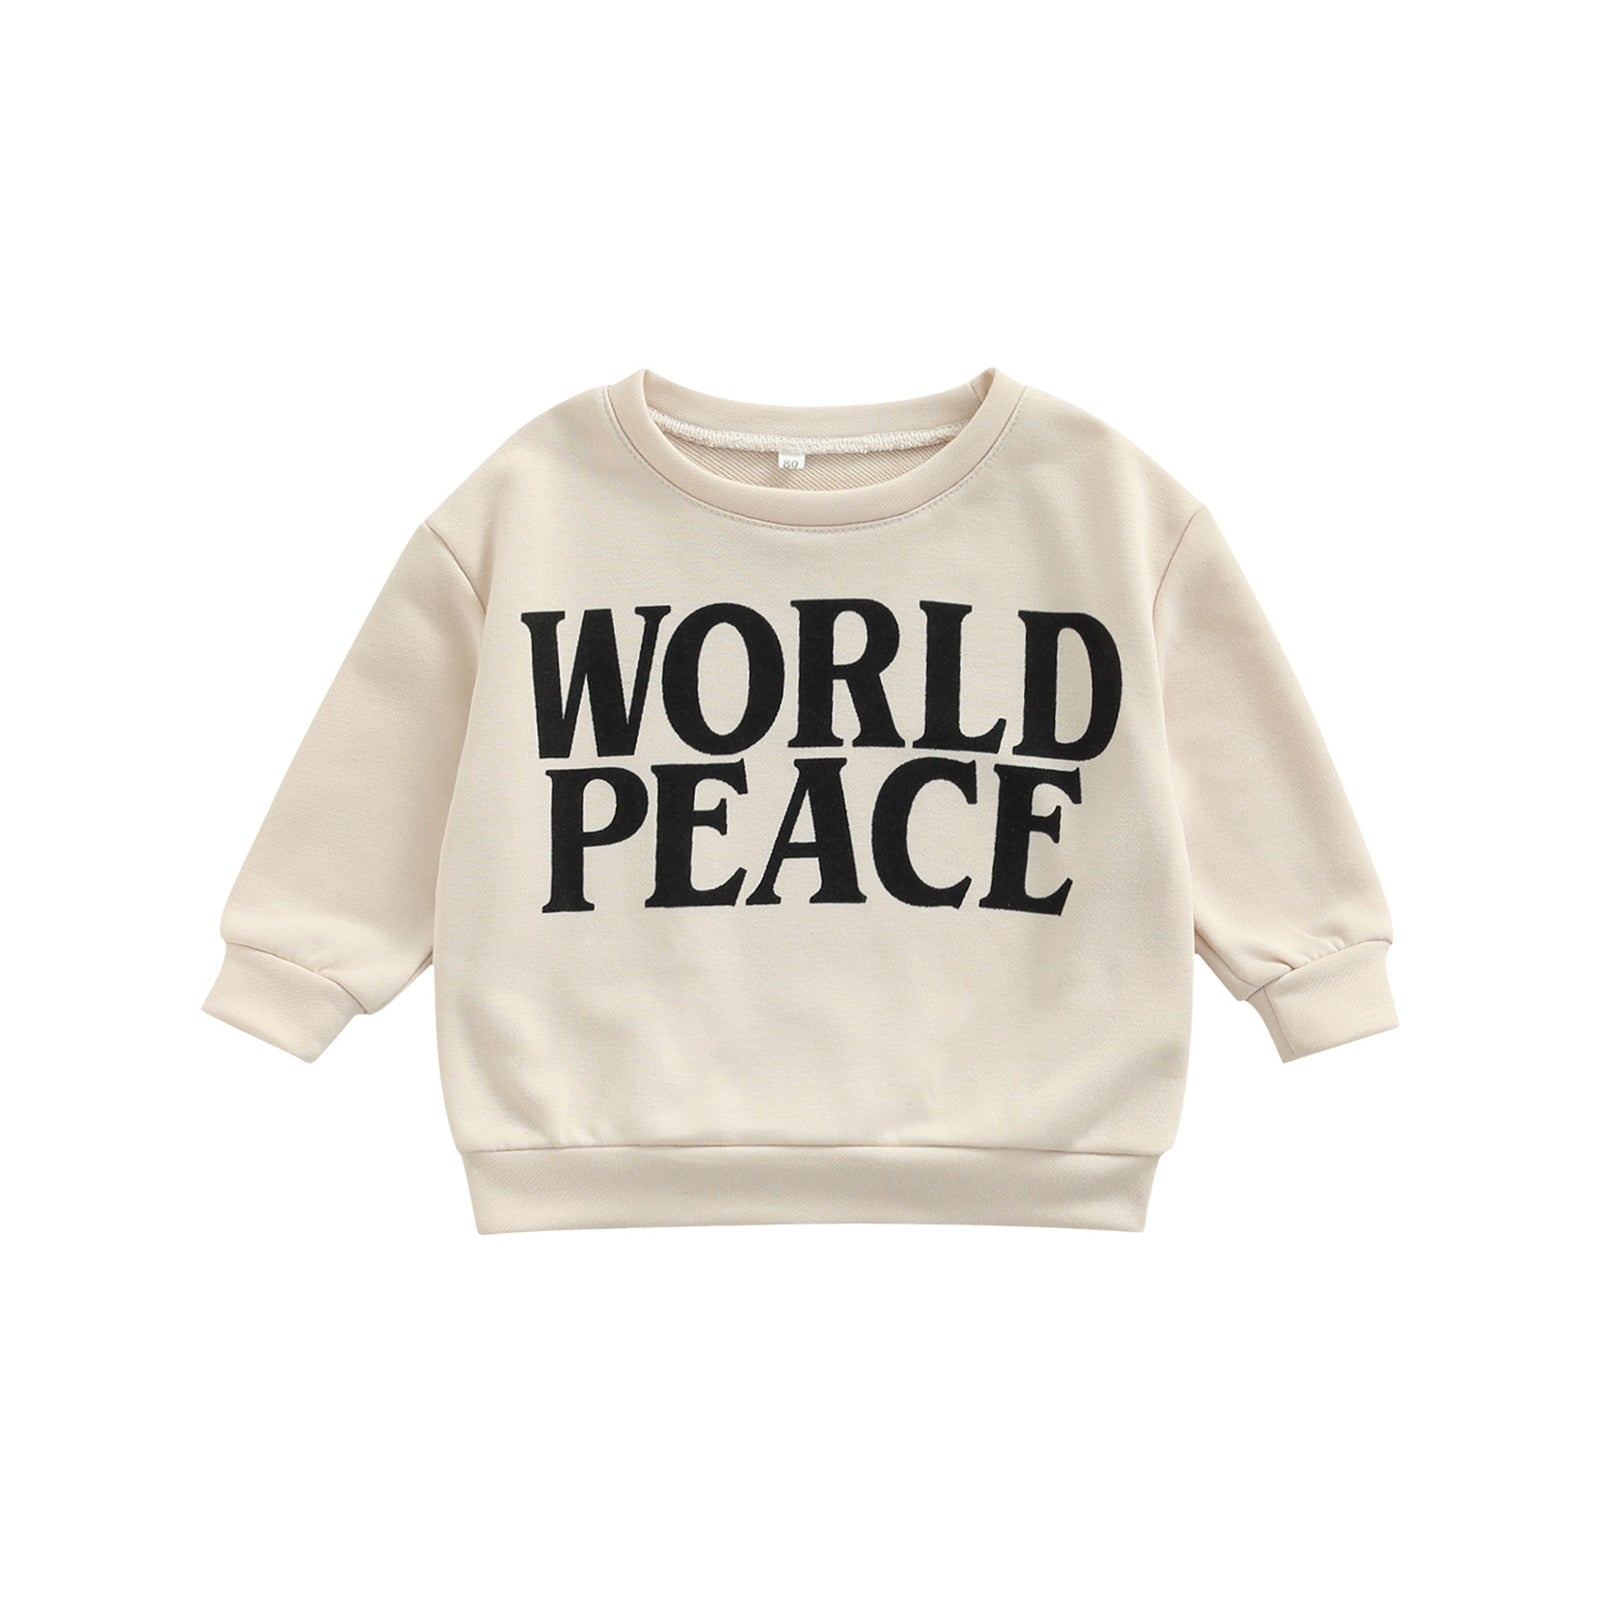 World Peace Top - Bubba Kids 2T / United States